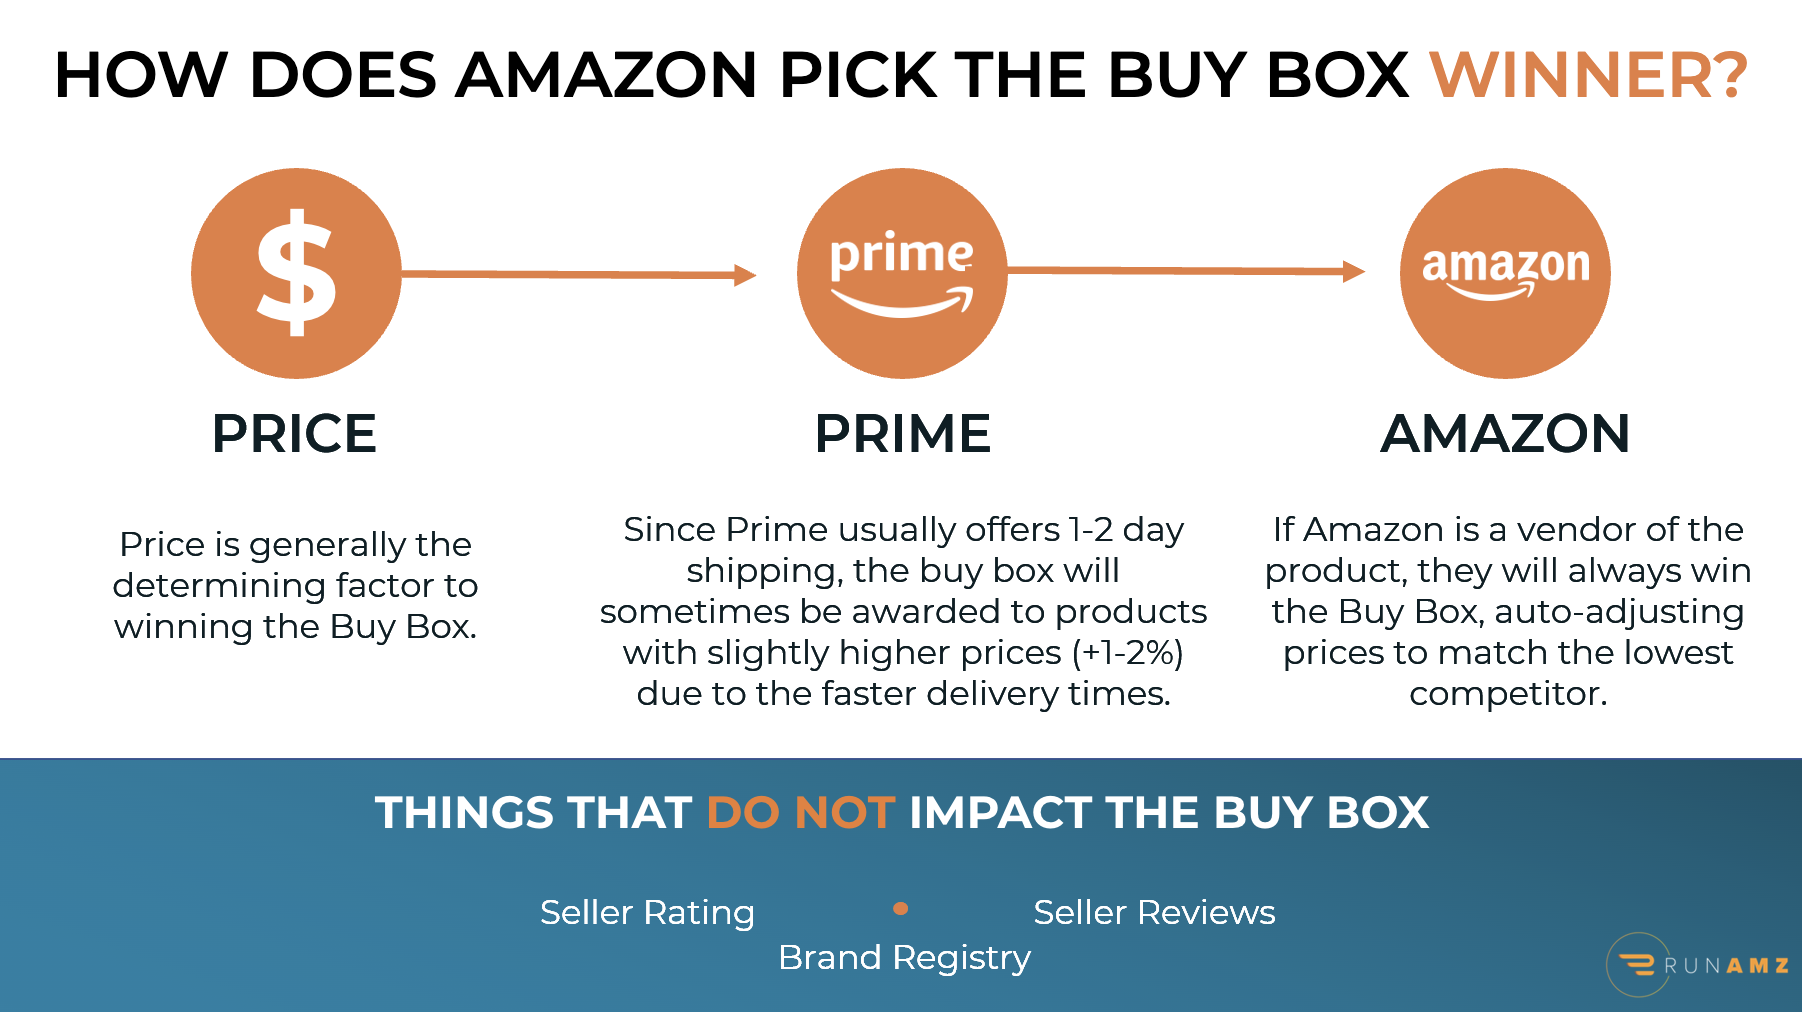 Infographic explaining how Amazon picks the buy box winner, as well as factors that do not have an impact on the buy box.